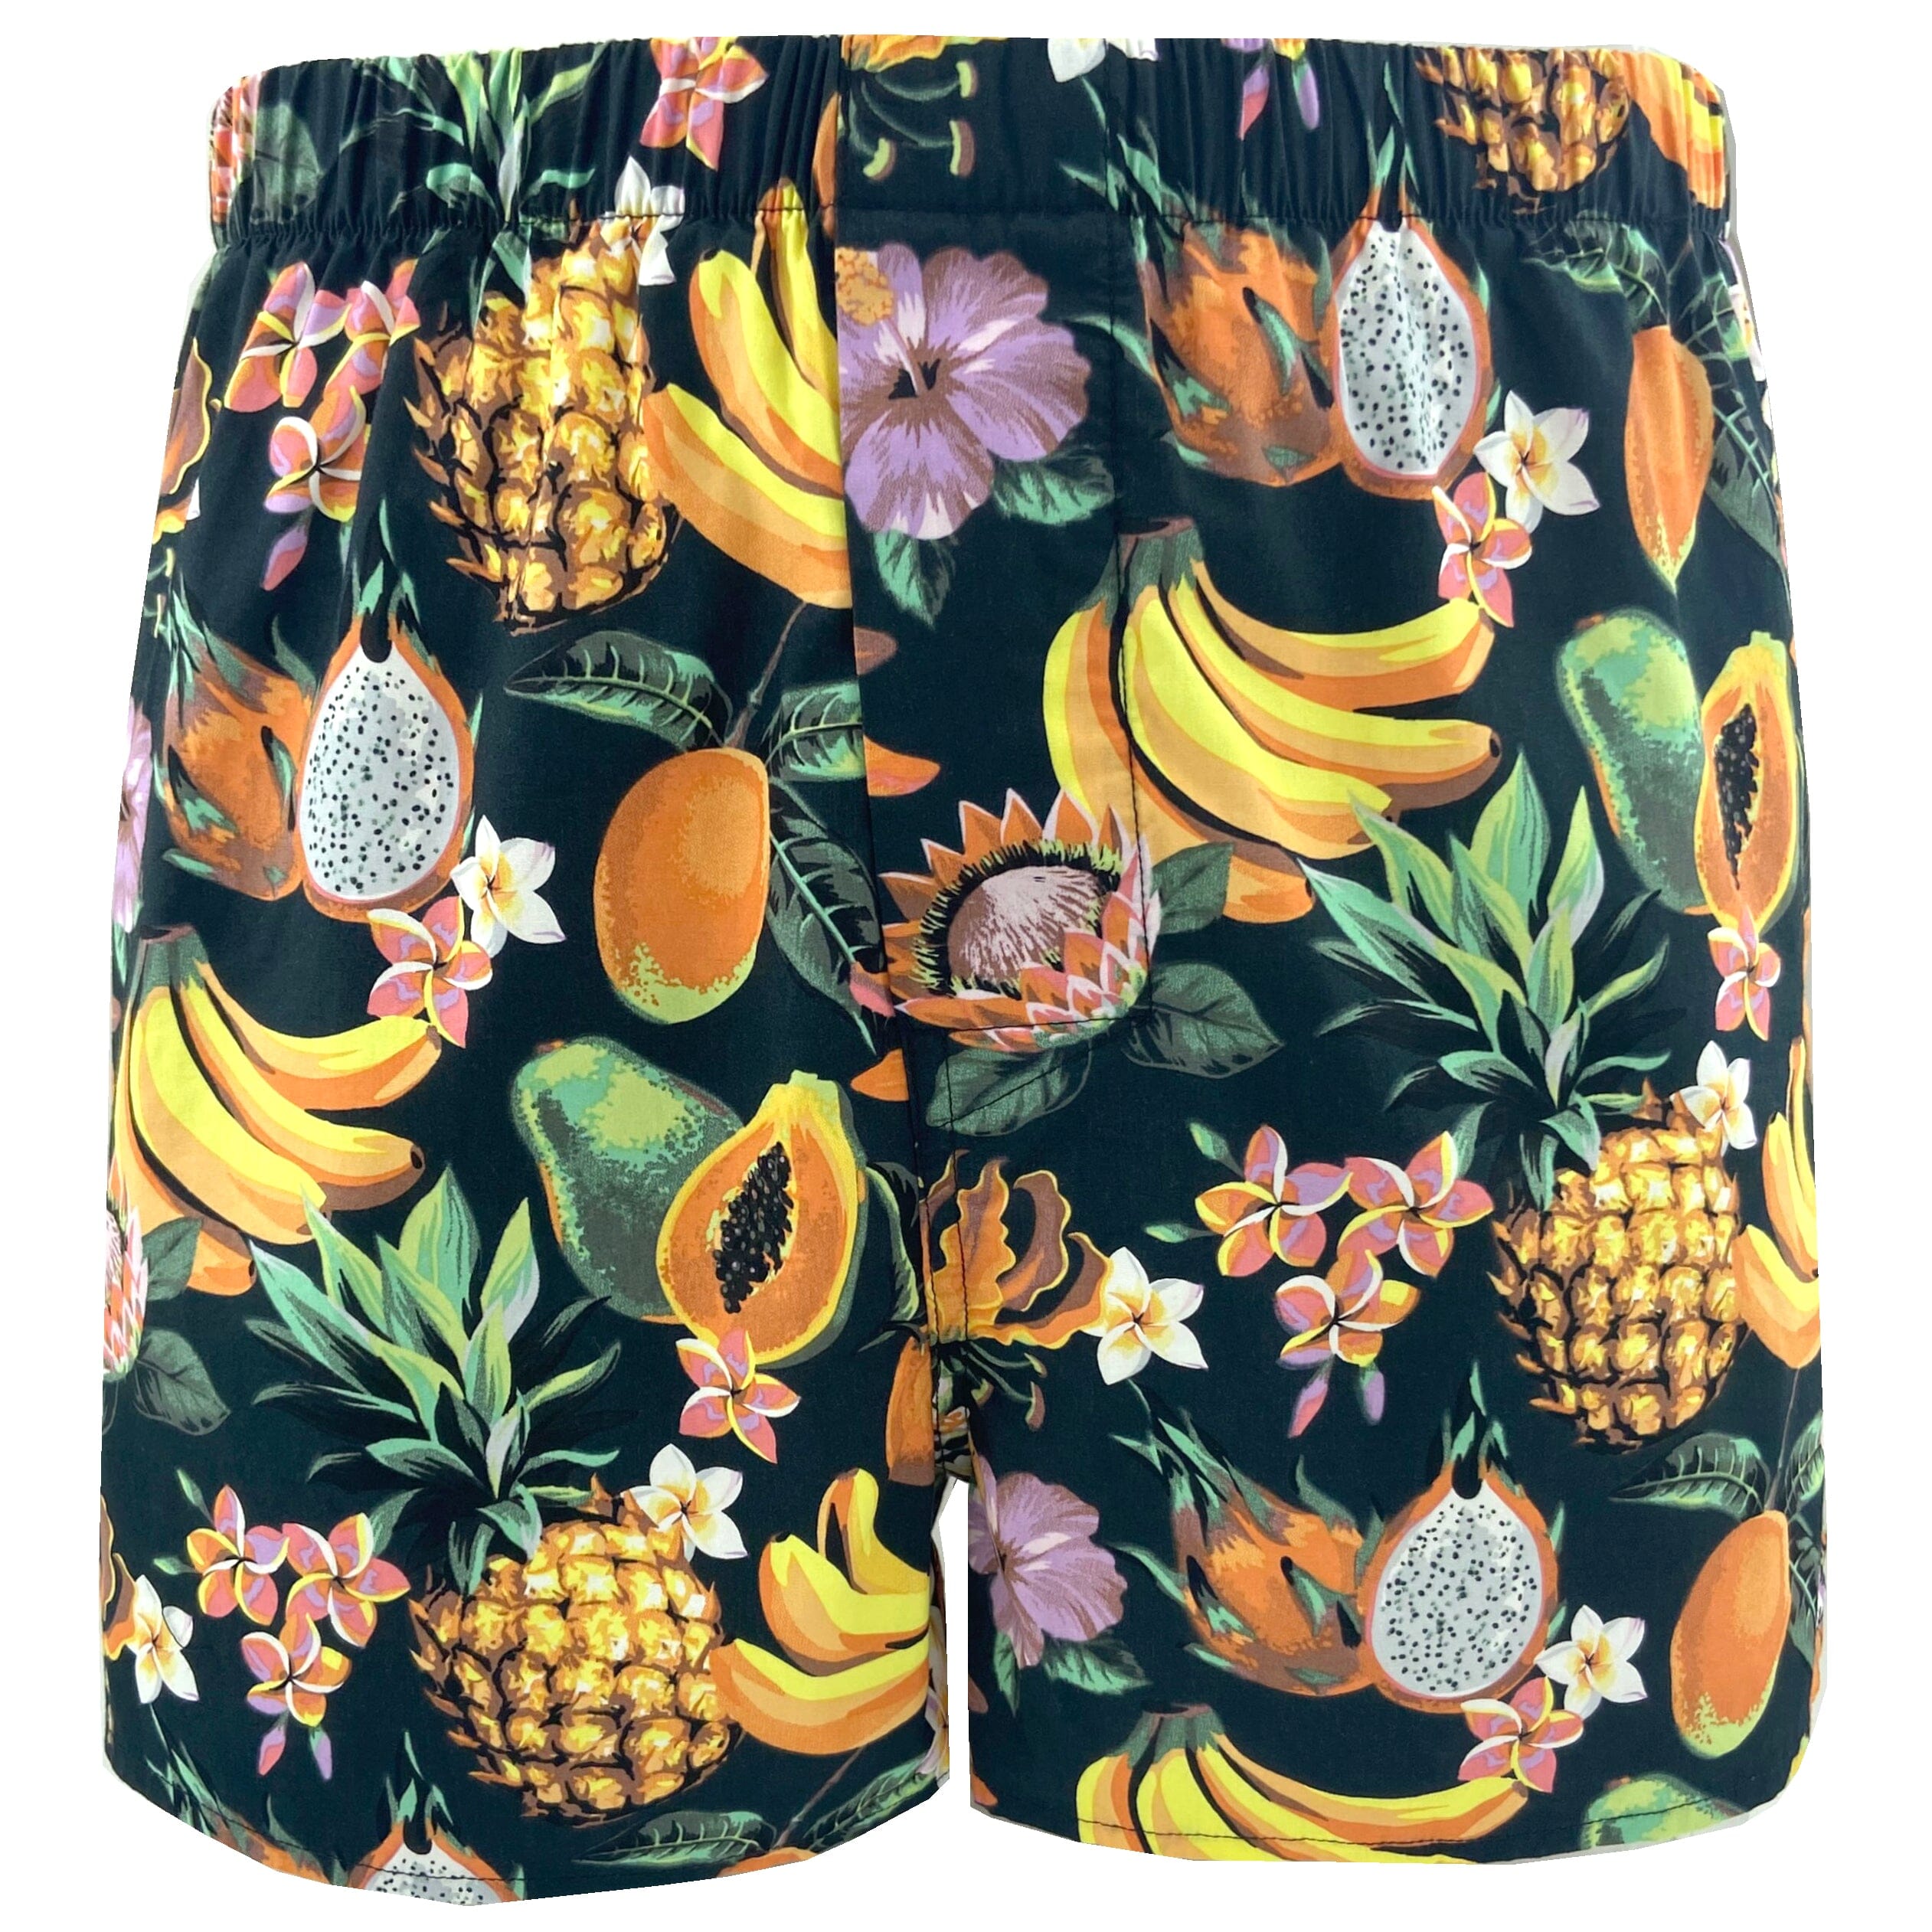 Yummy Men's Tropical Fruits and Flowers Patterned Cotton Boxer Shorts